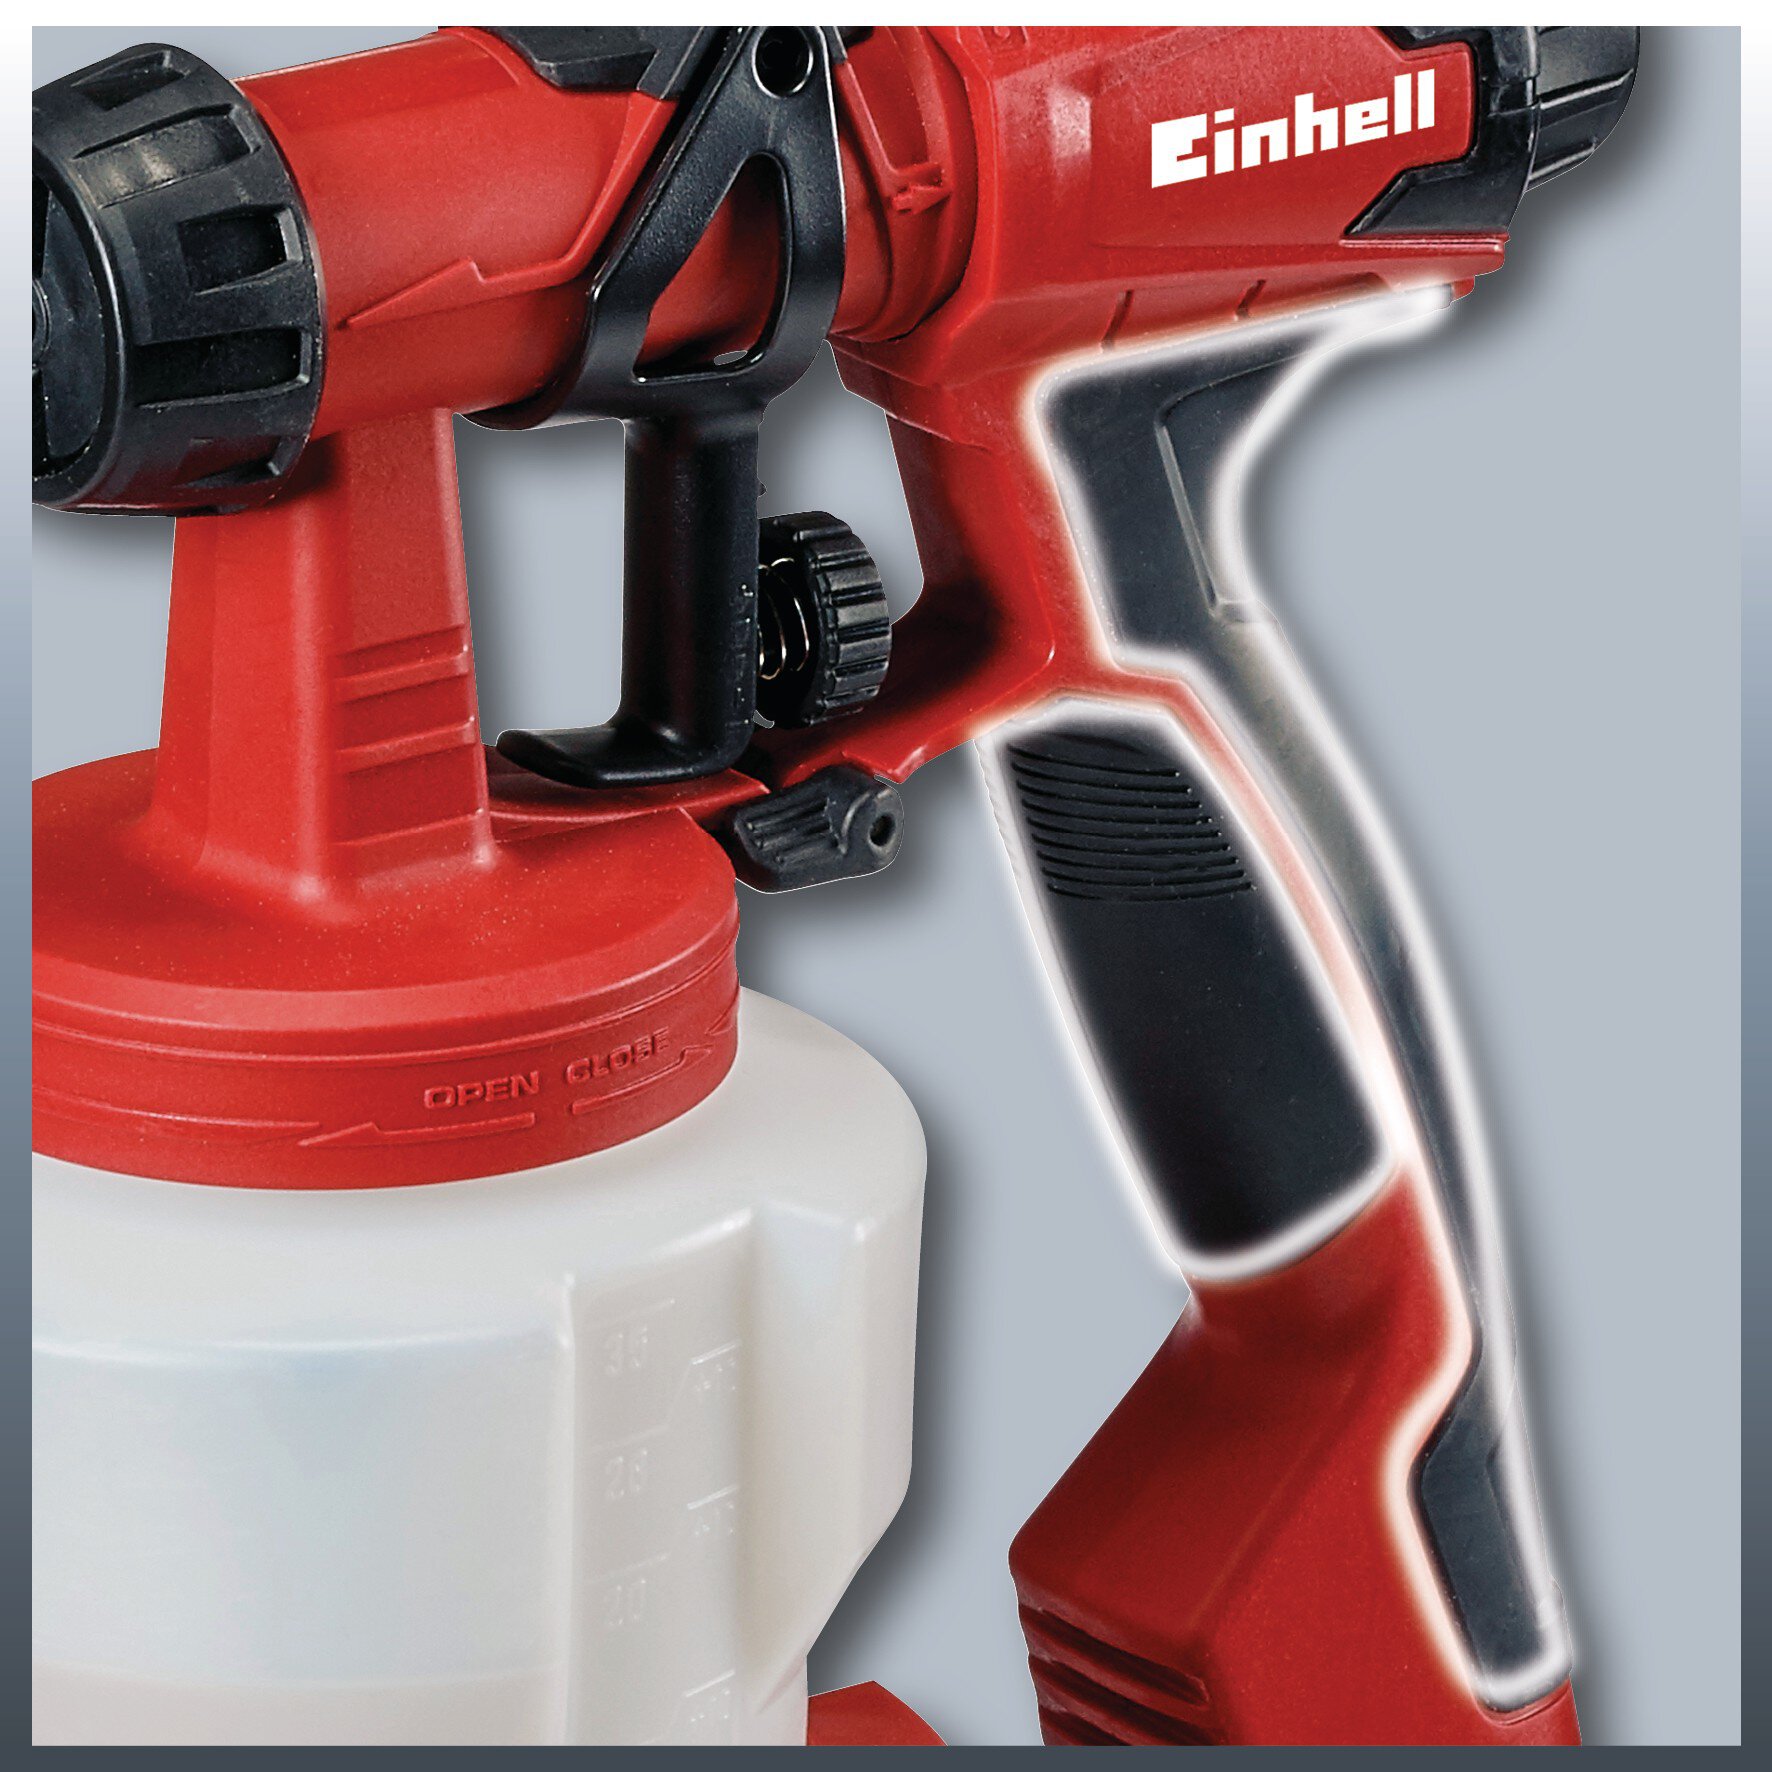 einhell-classic-paint-spray-system-4260020-detail_image-104